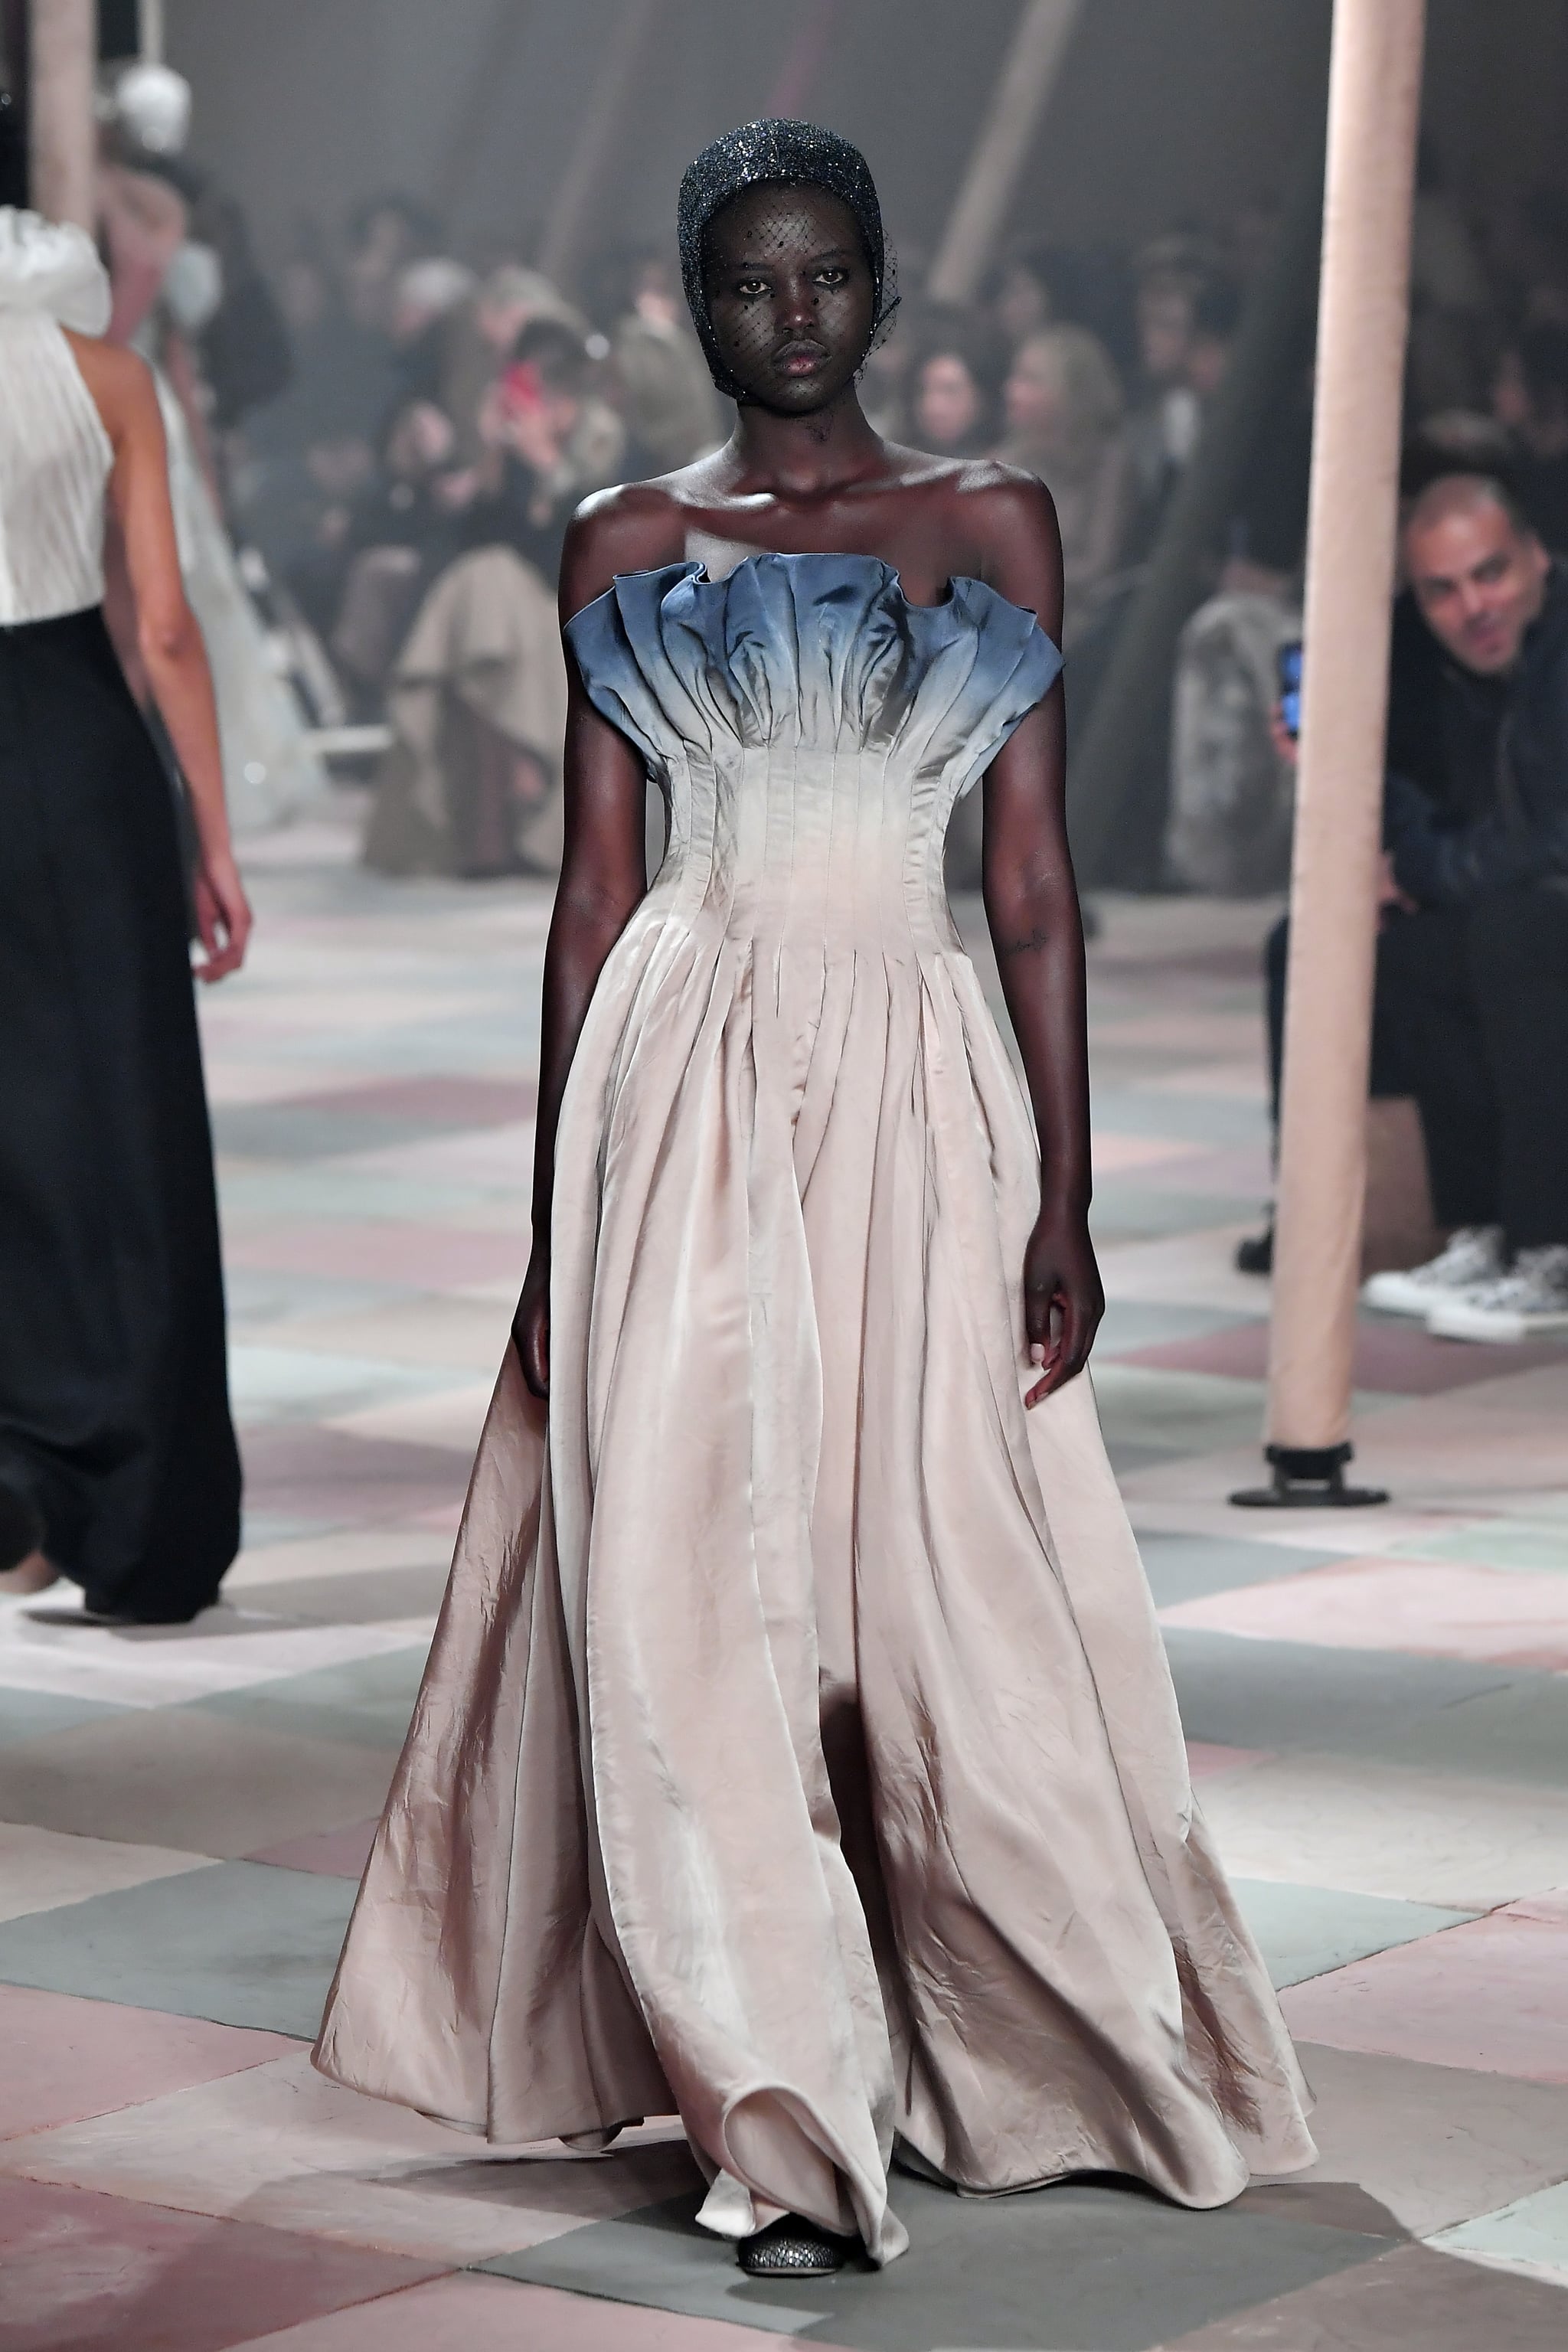 Christian Dior Haute Couture Spring Summer 2019, The Couture Gowns We're  Waiting to See at the Oscars